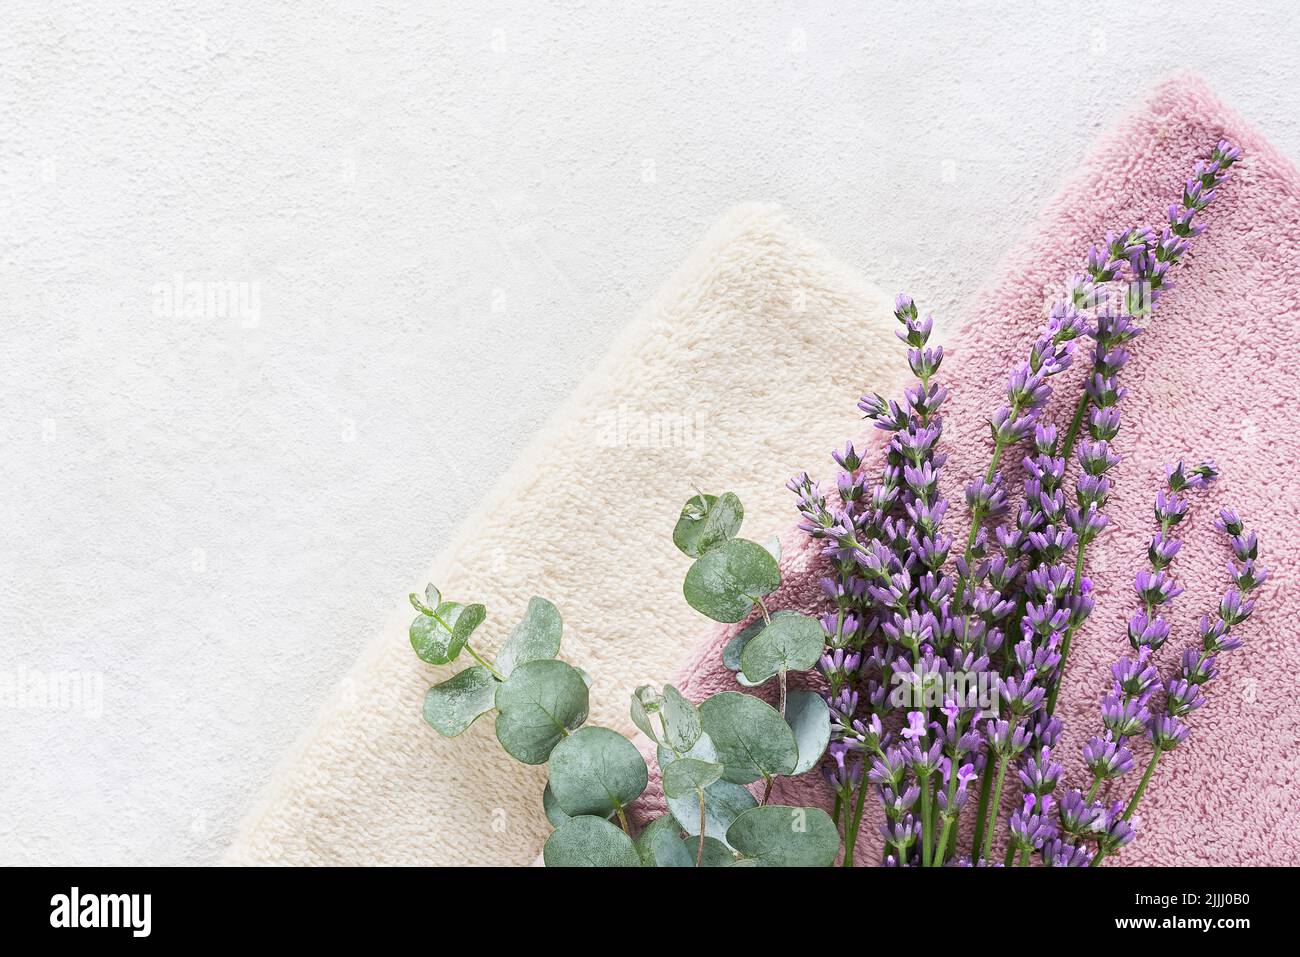 Lavender flowers, a green eucalyptus branch and fluffy towels on the light background. SPA, wellness well-being, body care concept. Copy space Stock Photo